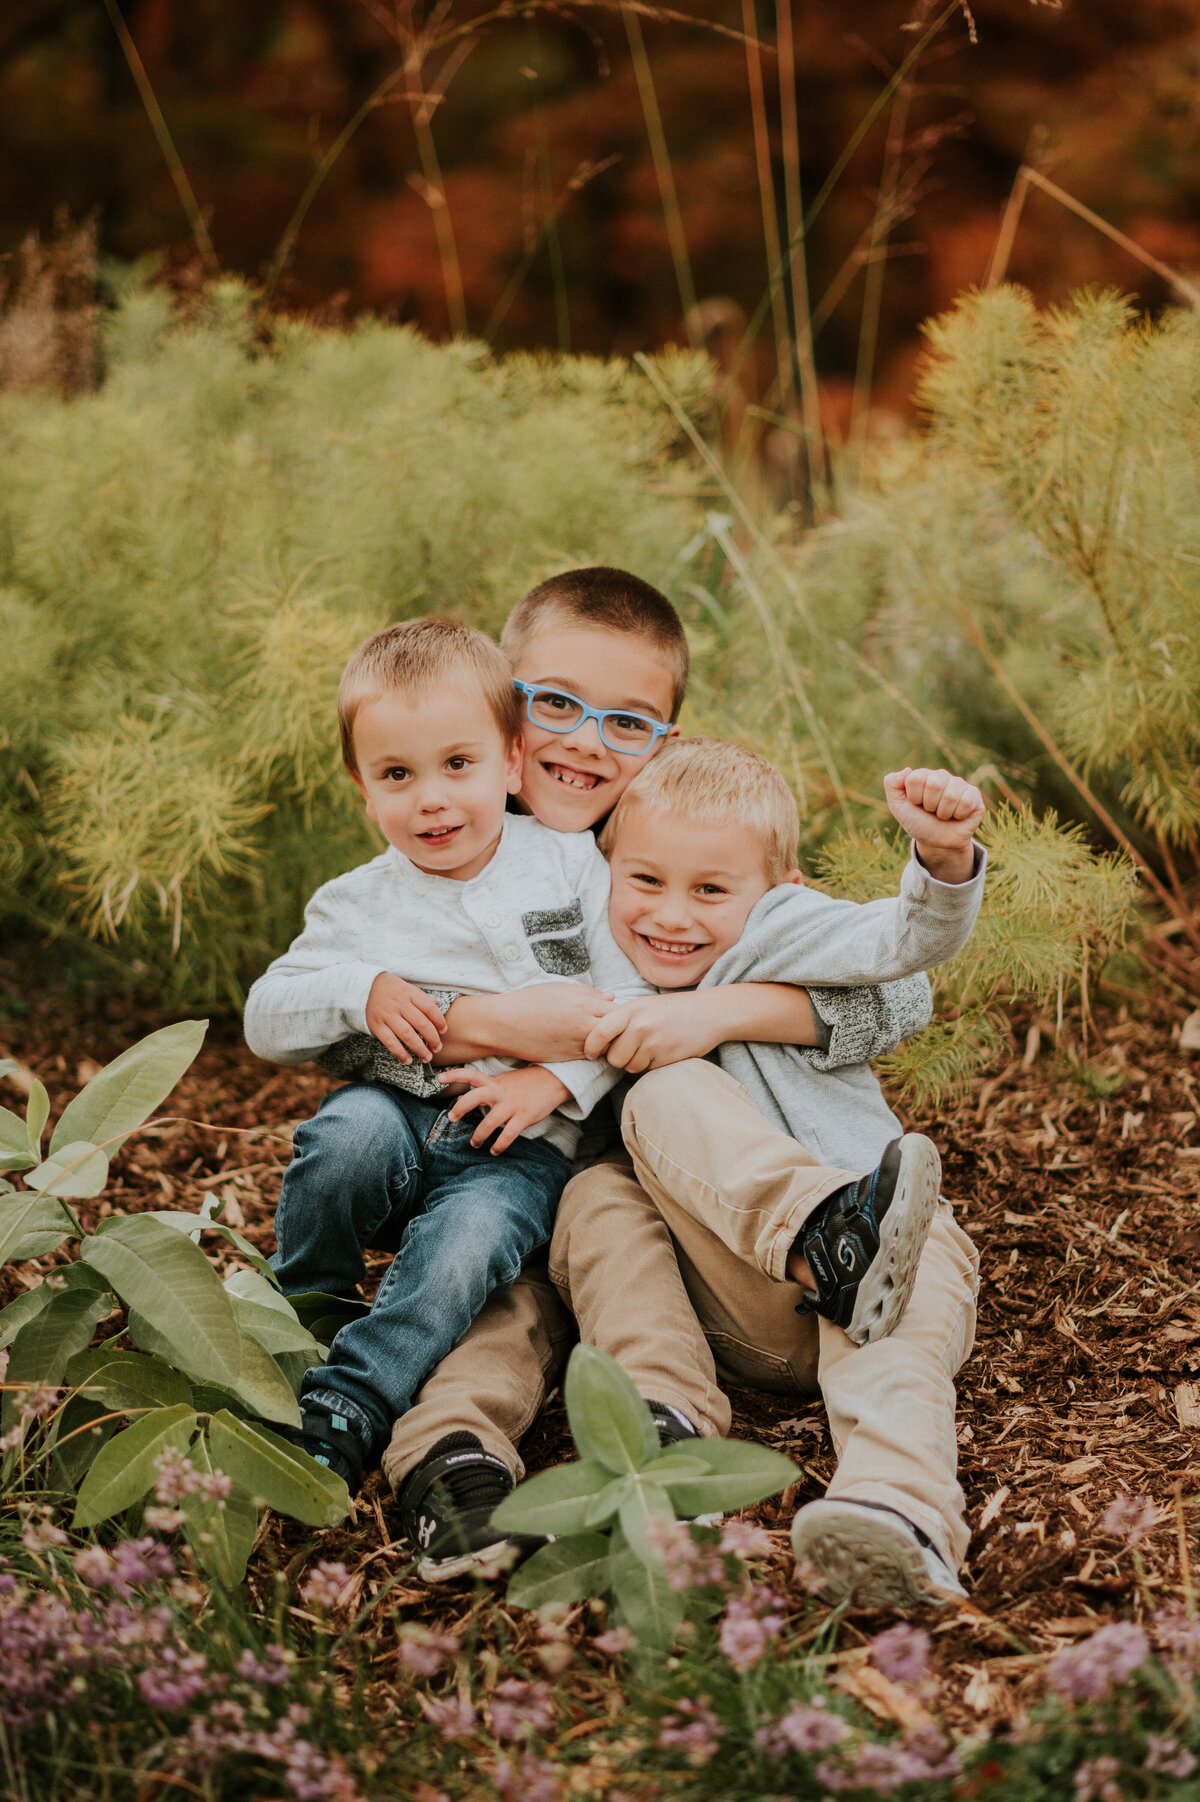 Attend a garden gala for your family photos in St. Paul and Minneapolis. Shannon Kathleen Photography immortalizes your family's bond amidst blooming flowers. Book now for gala memories